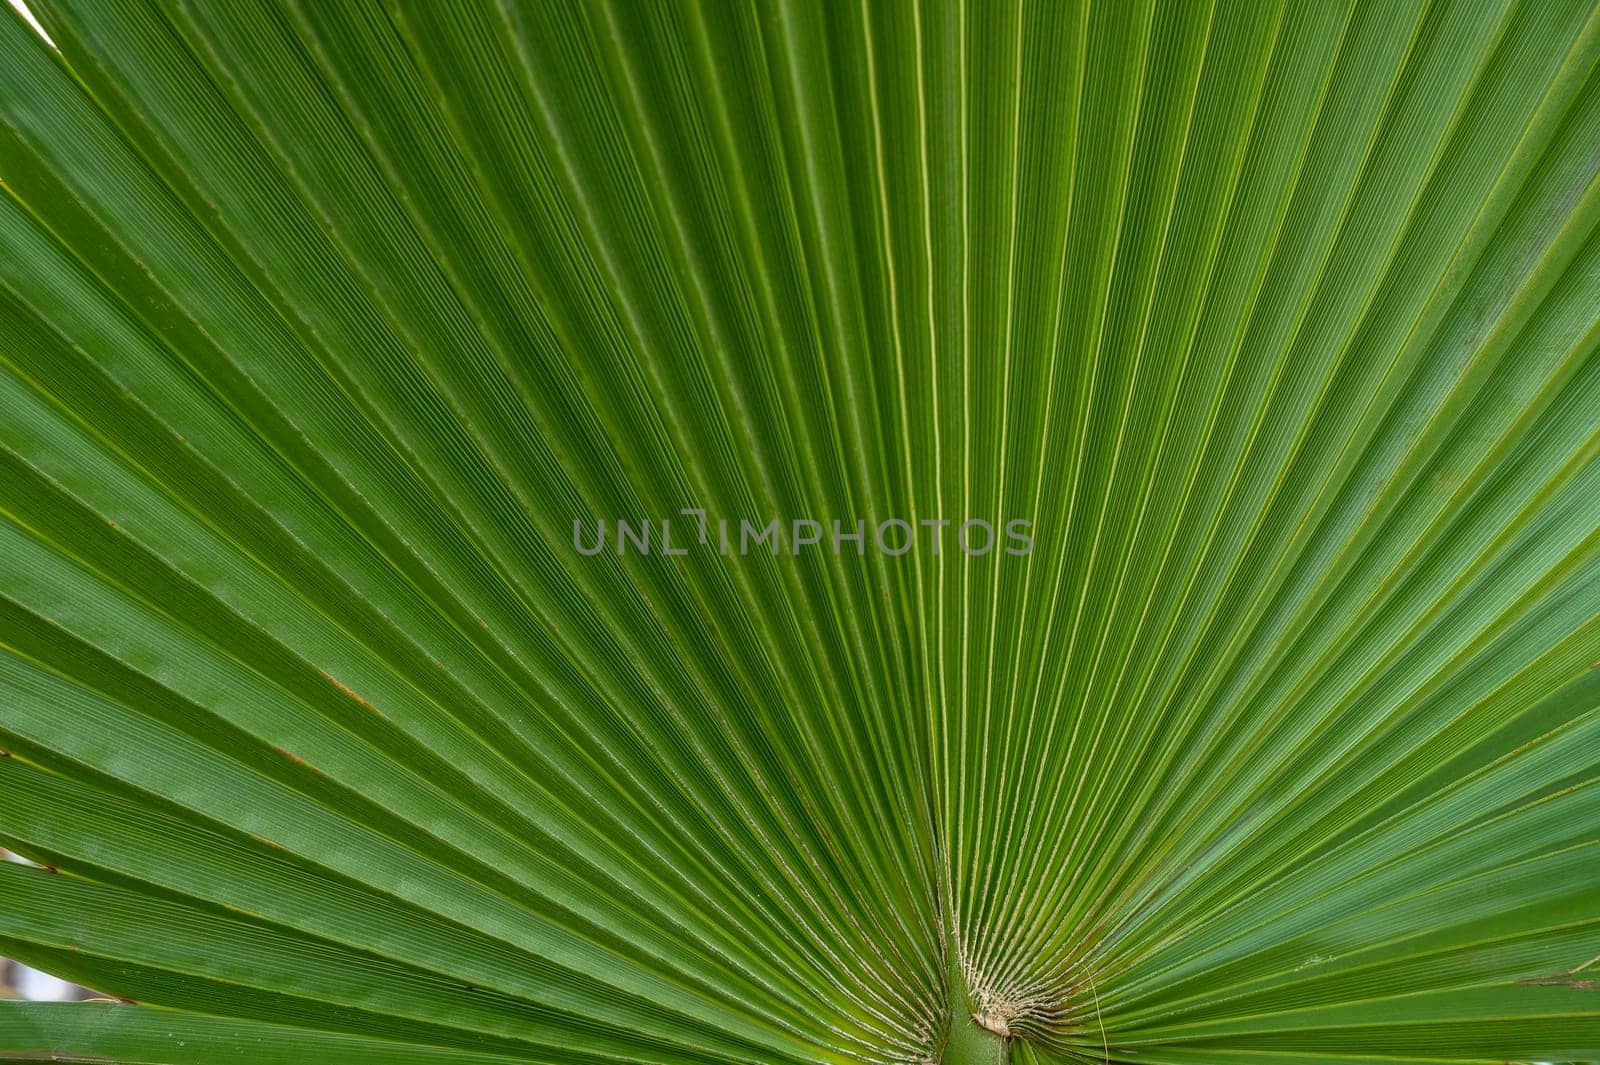 palm leaf as a background for photos 2 by Mixa74